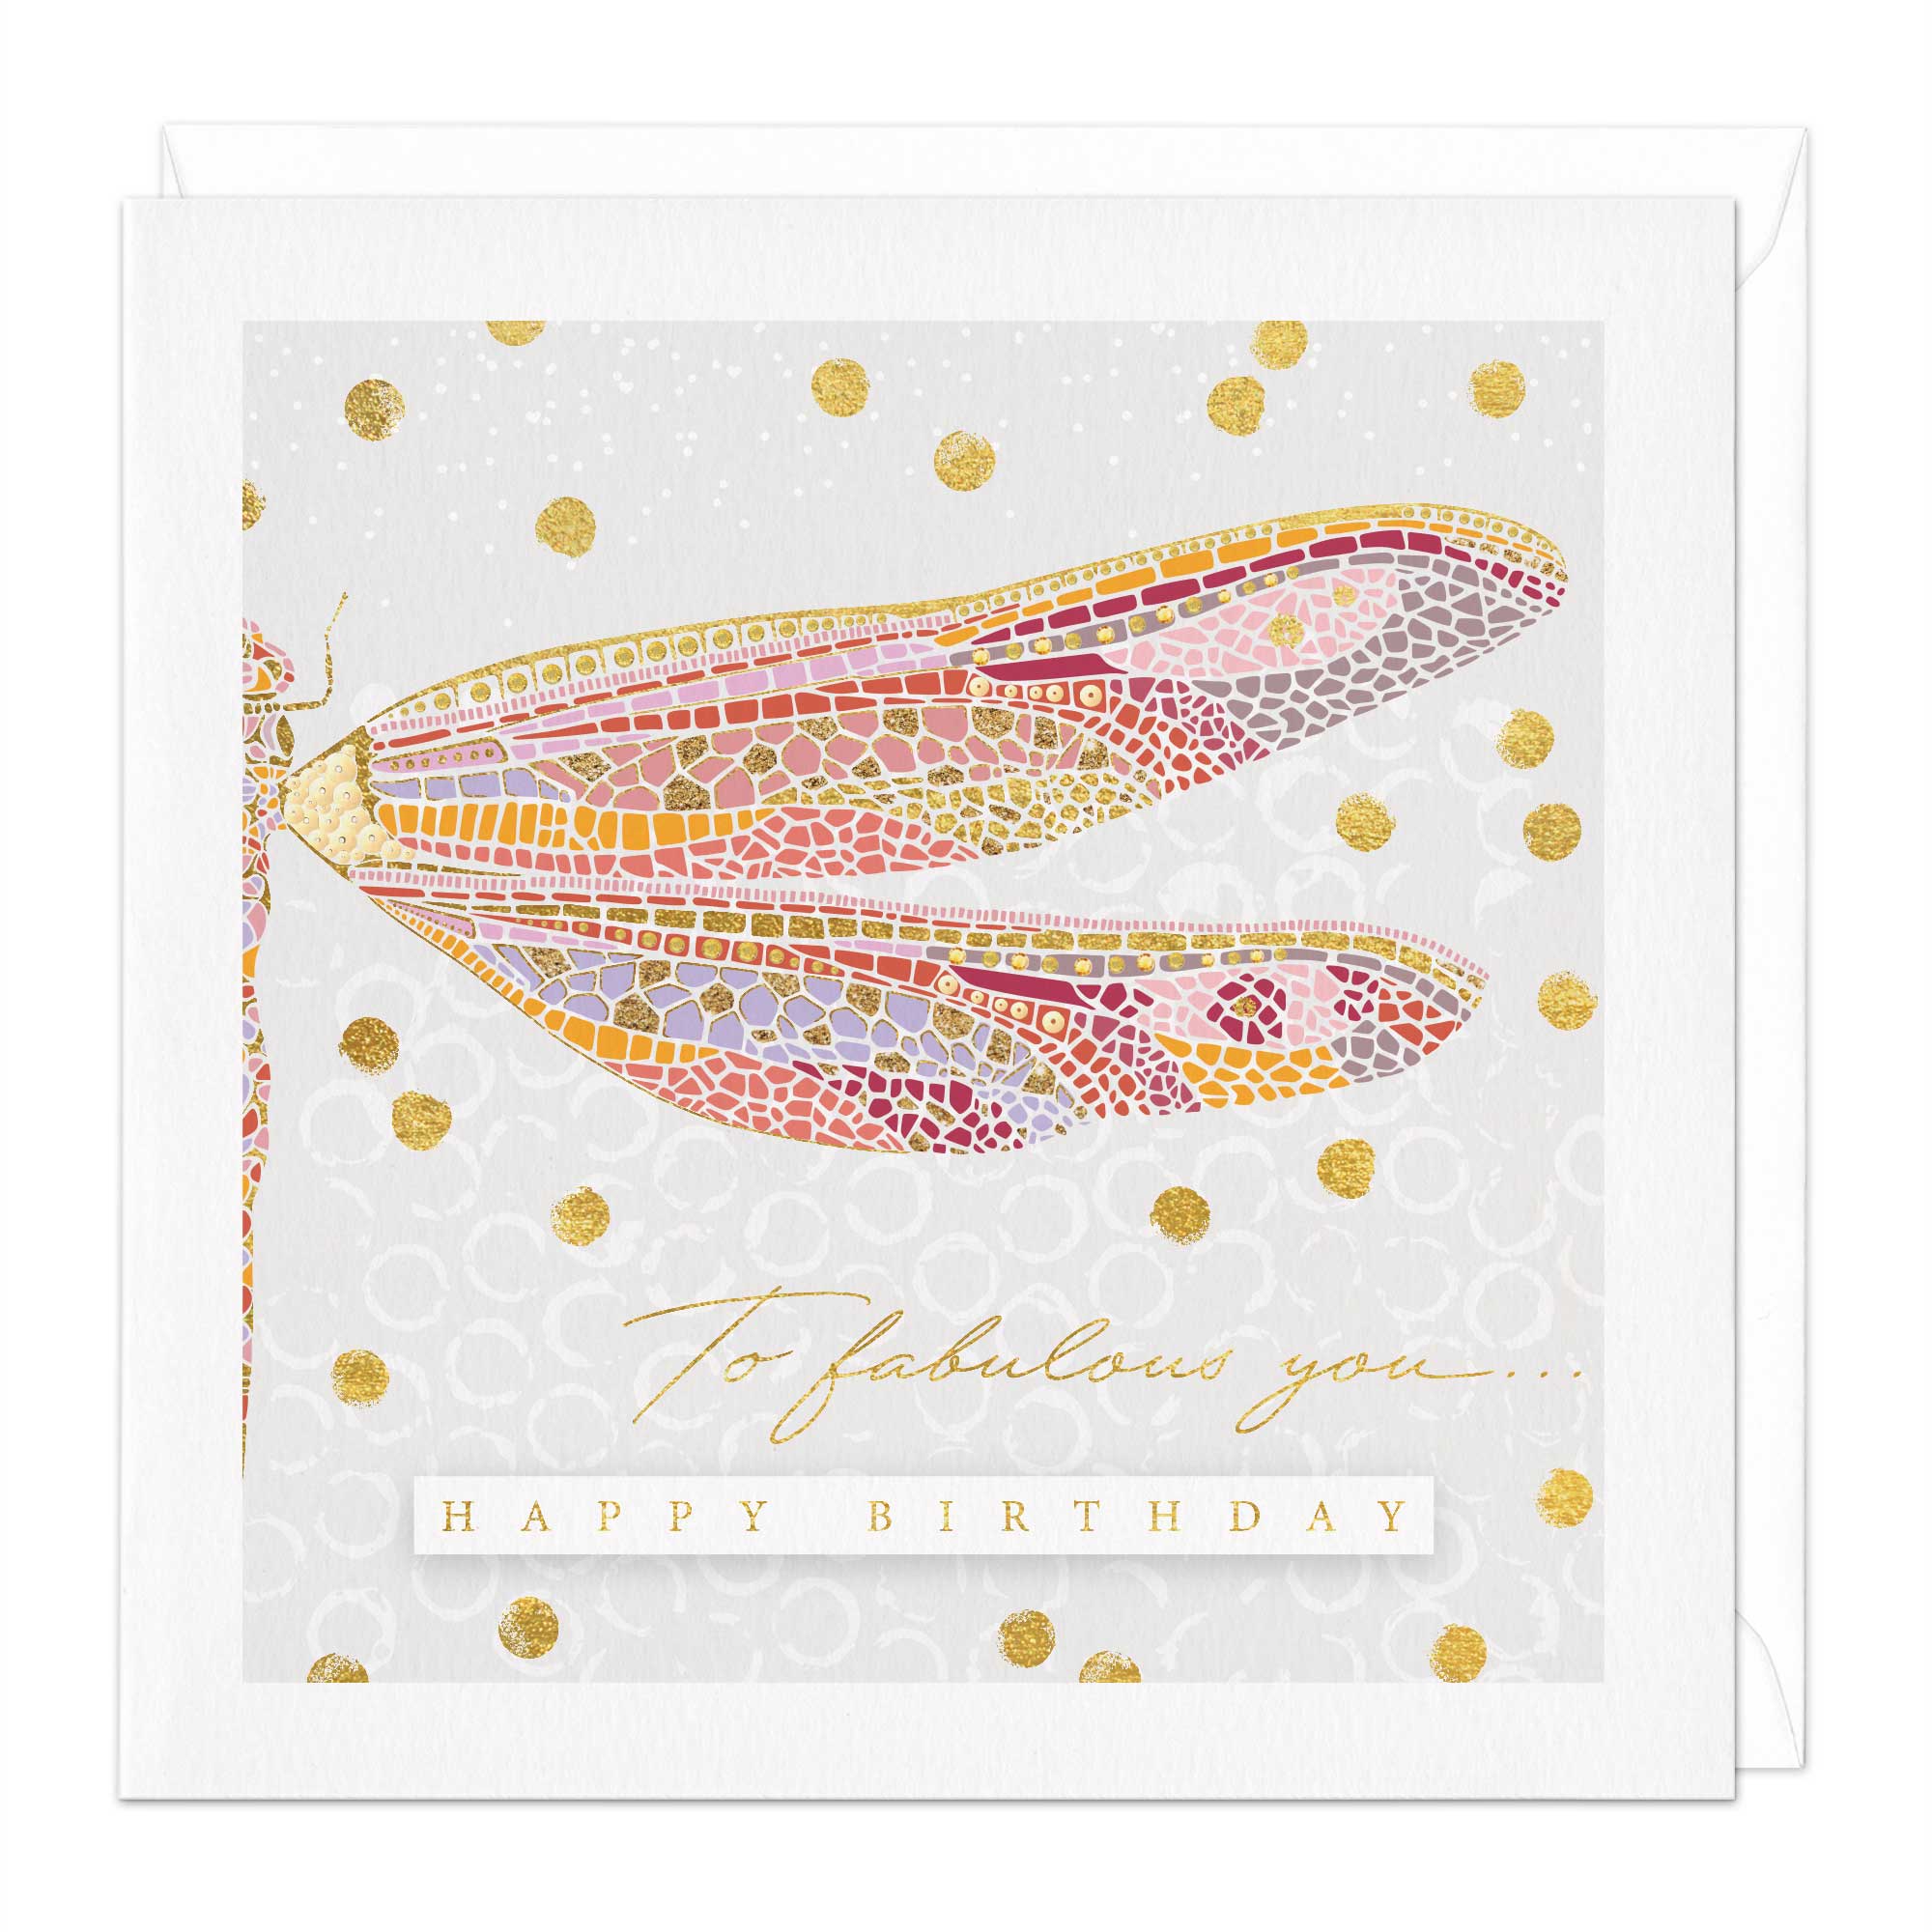 Patterned Dragonfly Birthday Card